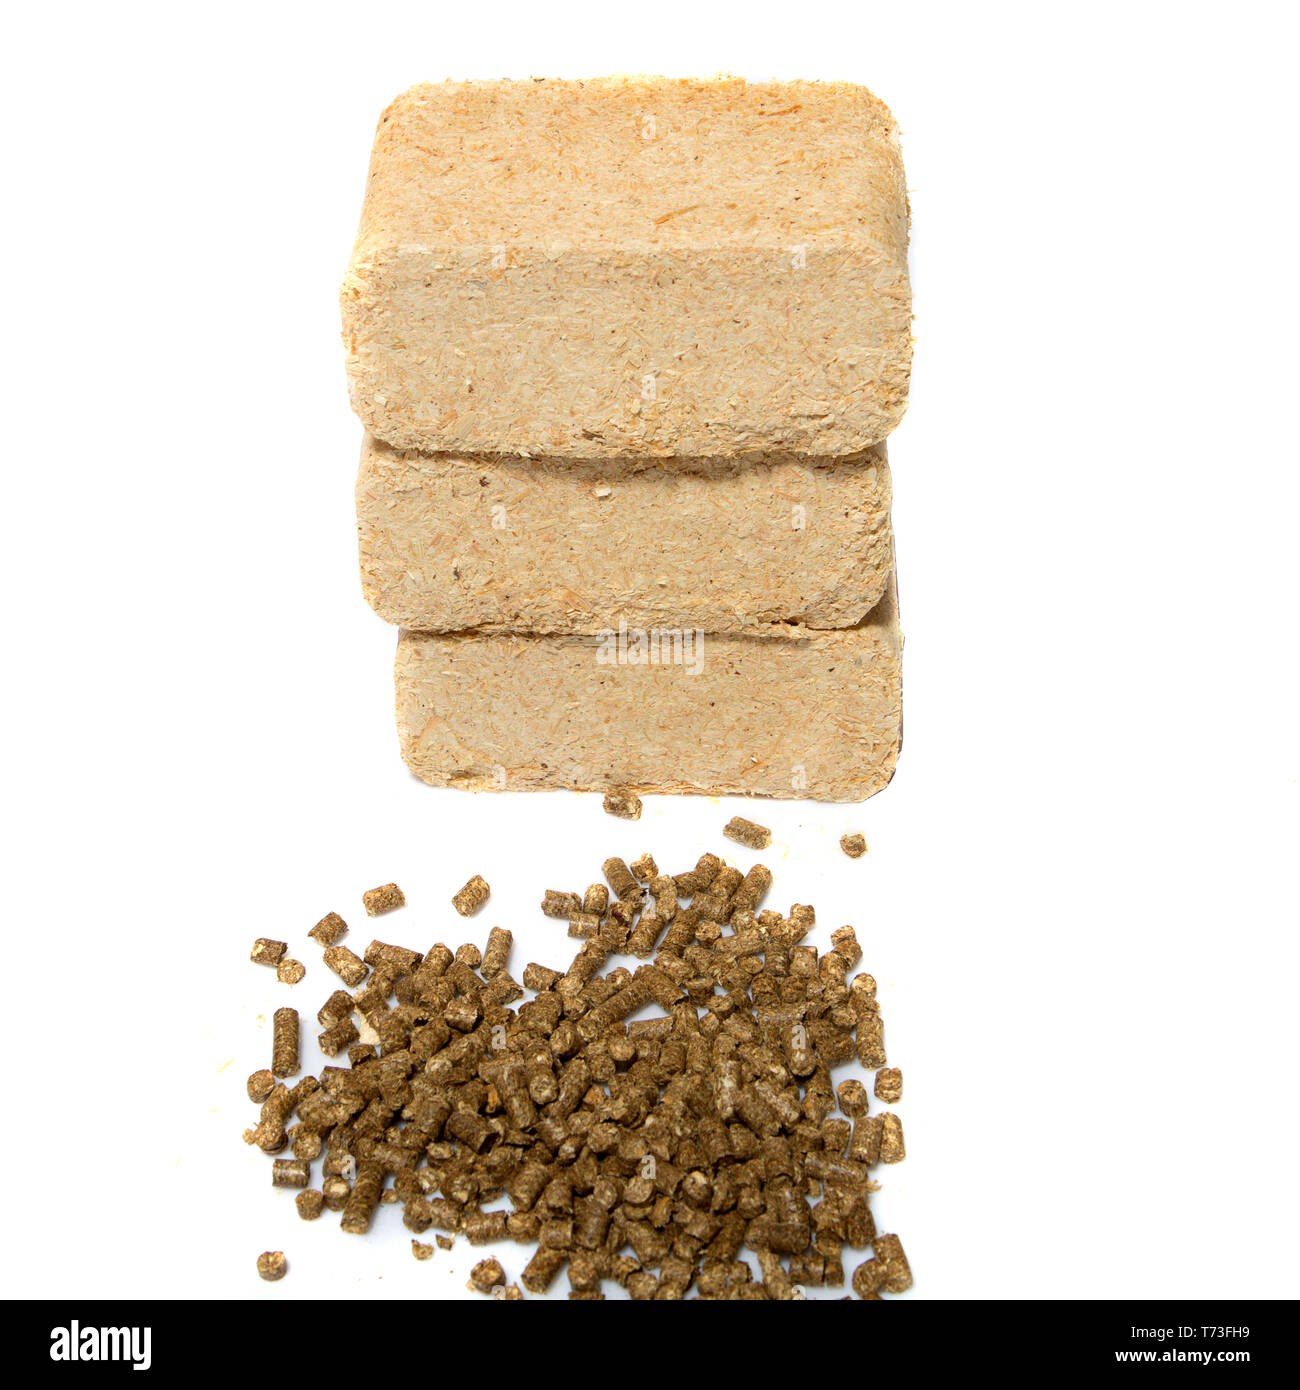 sawdust briquettes and pellets on white background Stock Photo